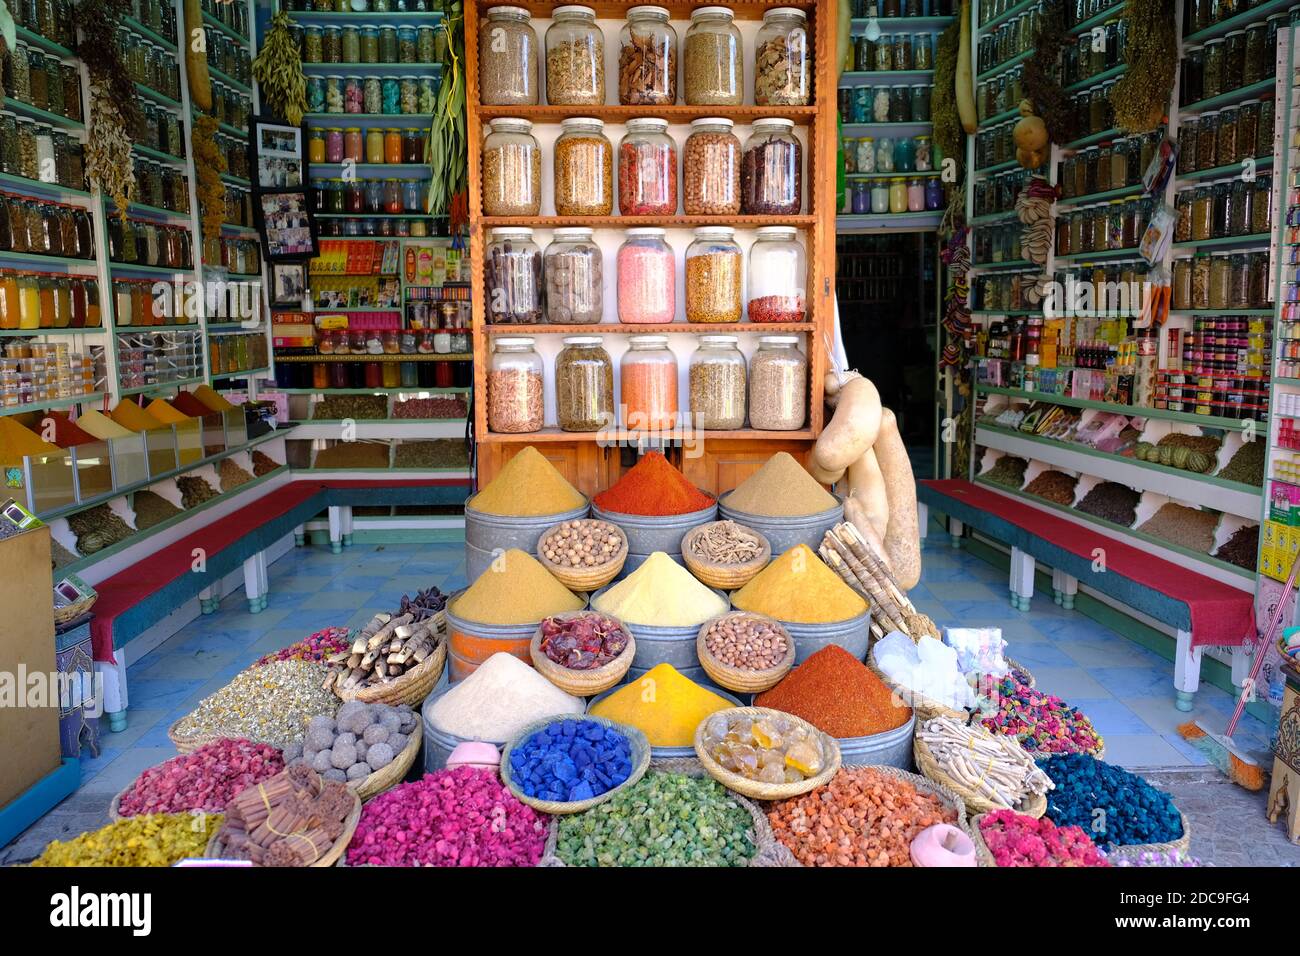 Morocco Marrakesh - Colorful stall spice and dye samples of a spice dealer in Medina Stock Photo